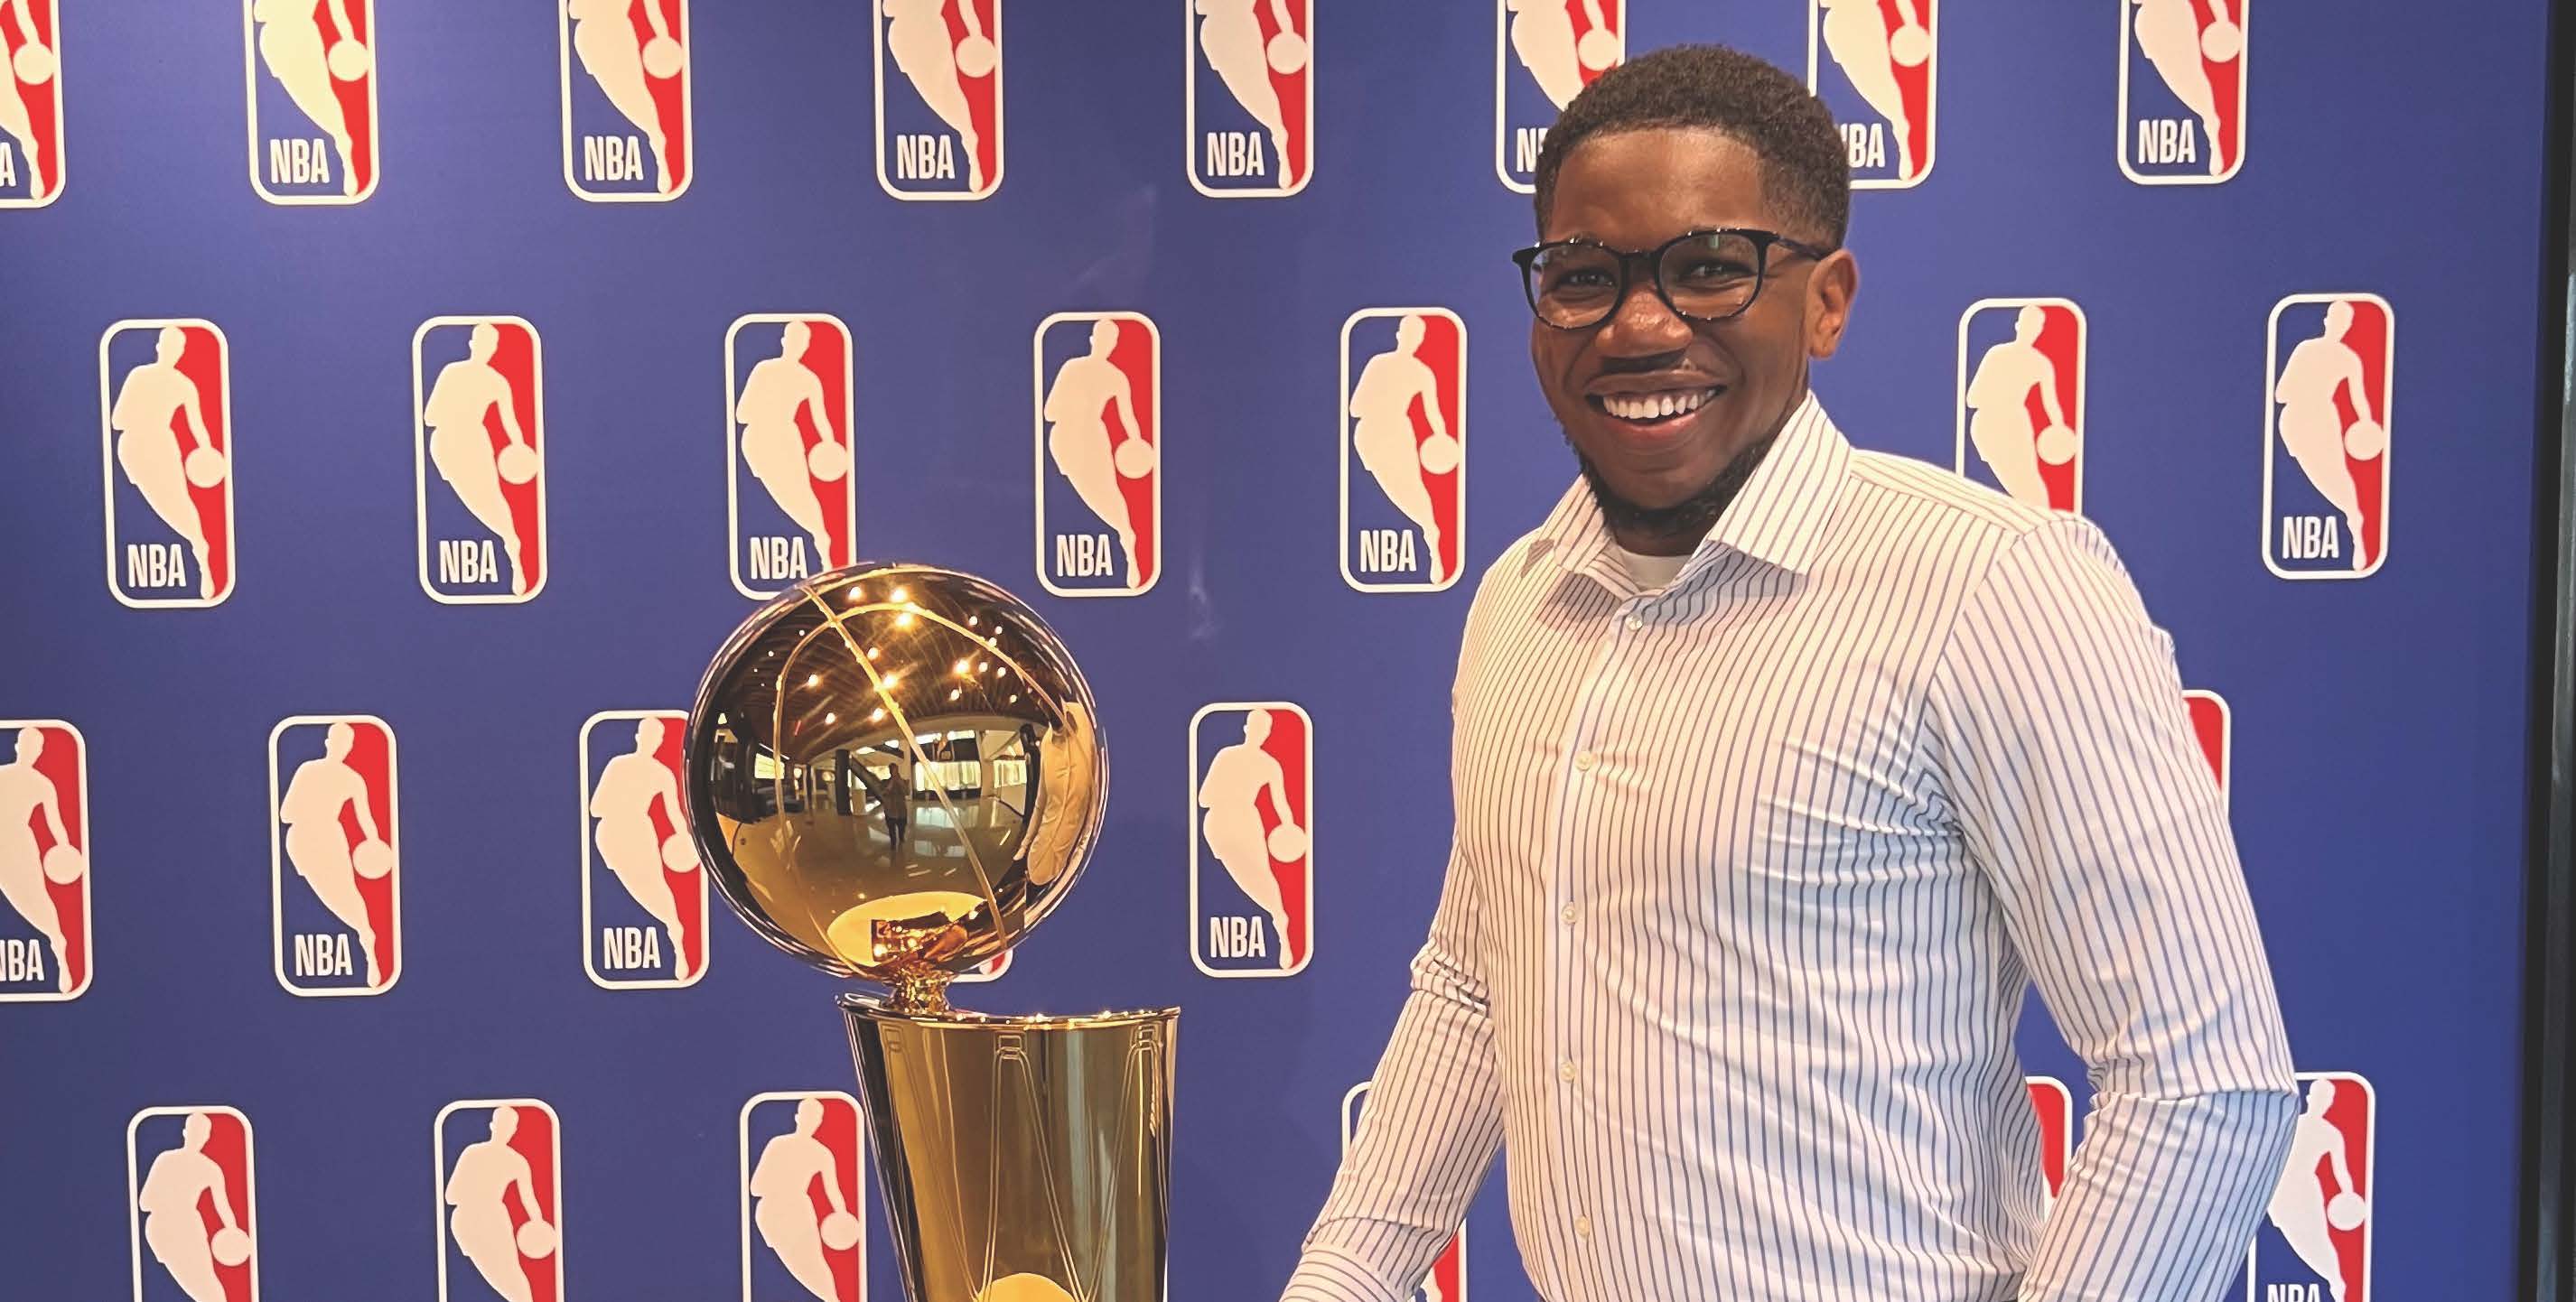 NYSCAS alum Jade Daniels standing next to NBA trophy in front of NBA step and repeat.